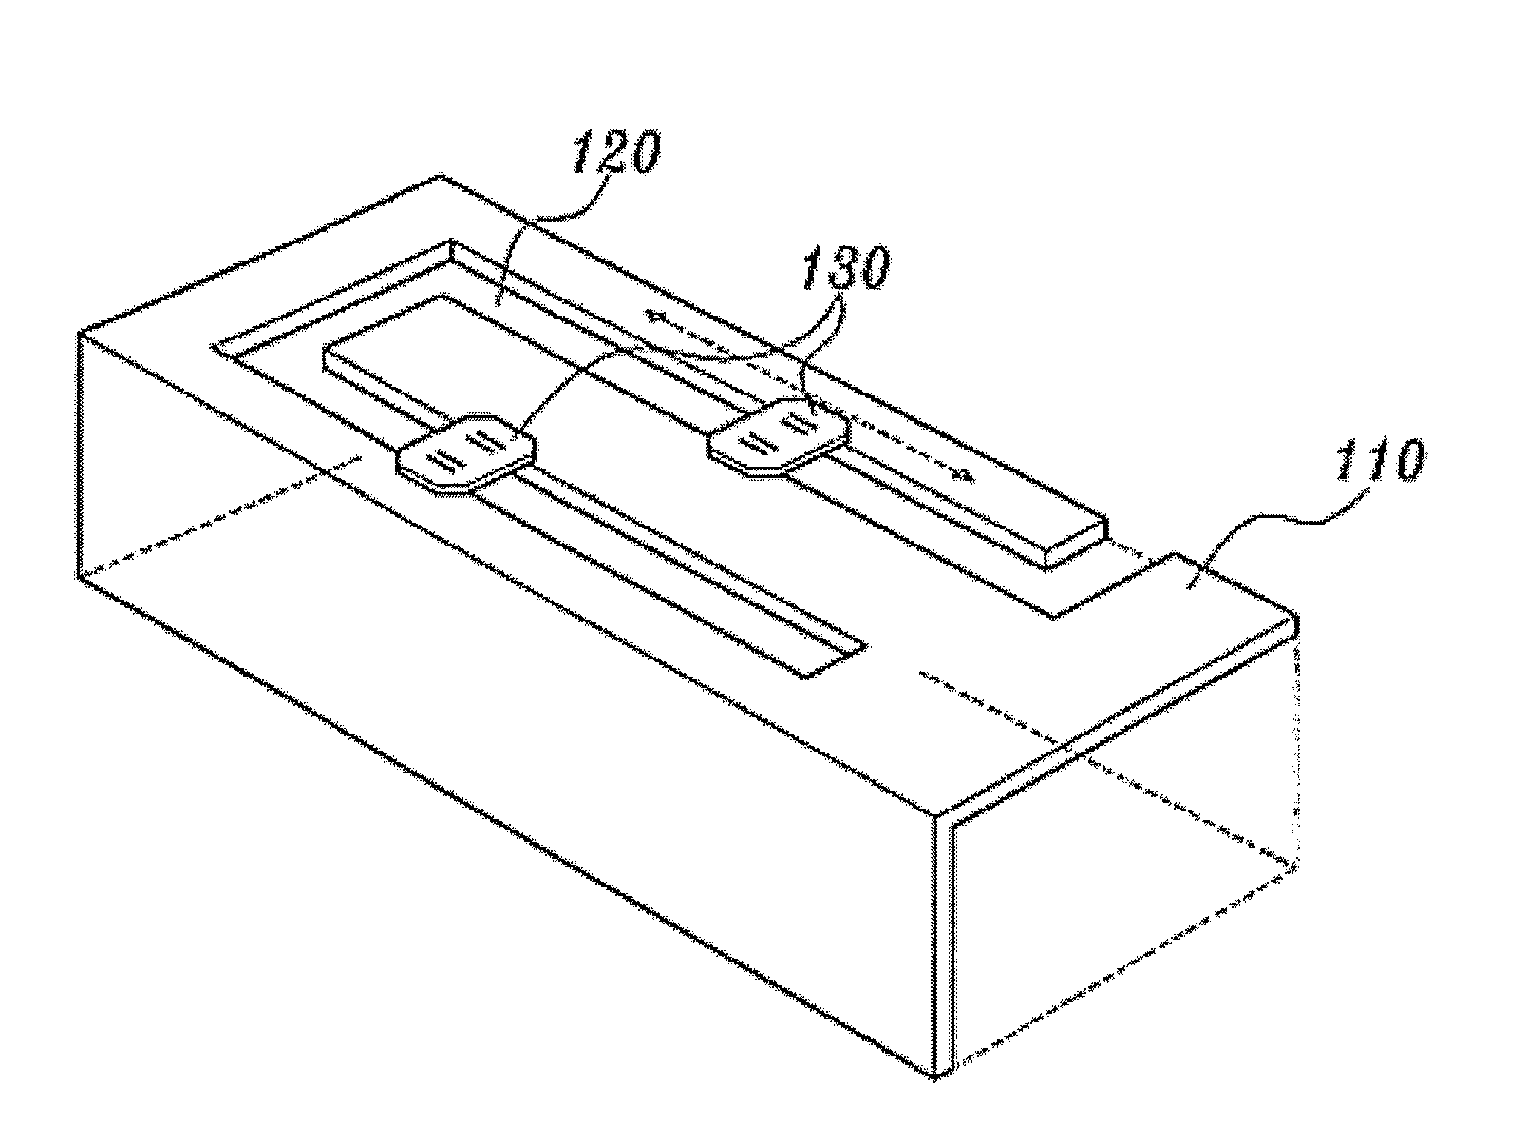 Internal Antenna for Handset and Design Method Thereof